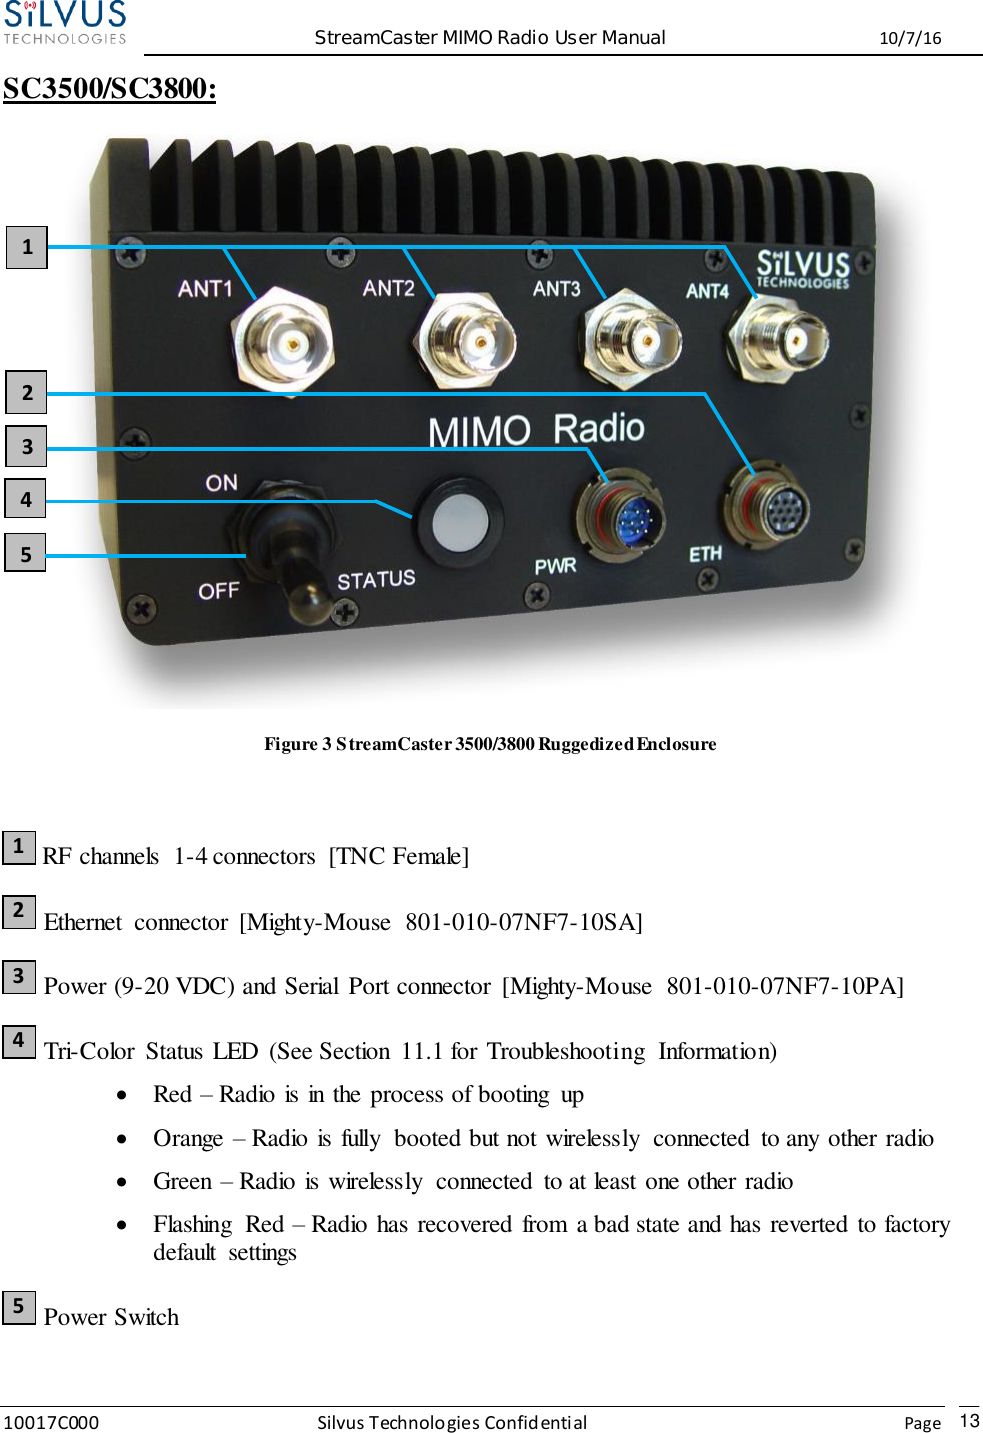  StreamCaster MIMO Radio User Manual  10/7/16 10017C000 Silvus Technologies Confidential    Page   13 SC3500/SC3800:    Figure 3 StreamCaster 3500/3800 Ruggedized Enclosure   RF channels  1-4 connectors  [TNC Female]  Ethernet  connector  [Mighty-Mouse  801-010-07NF7-10SA]  Power (9-20 VDC) and Serial  Port connector  [Mighty-Mouse  801-010-07NF7-10PA]  Tri-Color  Status LED  (See Section  11.1 for Troubleshooting  Information)  Red – Radio is in the process of booting  up  Orange – Radio is fully  booted but not wirelessly  connected  to any other radio  Green – Radio is wirelessly  connected  to at least one other radio  Flashing  Red – Radio has recovered from  a bad state and has reverted to factory default  settings  Power Switch  1 2 3 4 5 2 3 4 5 1 